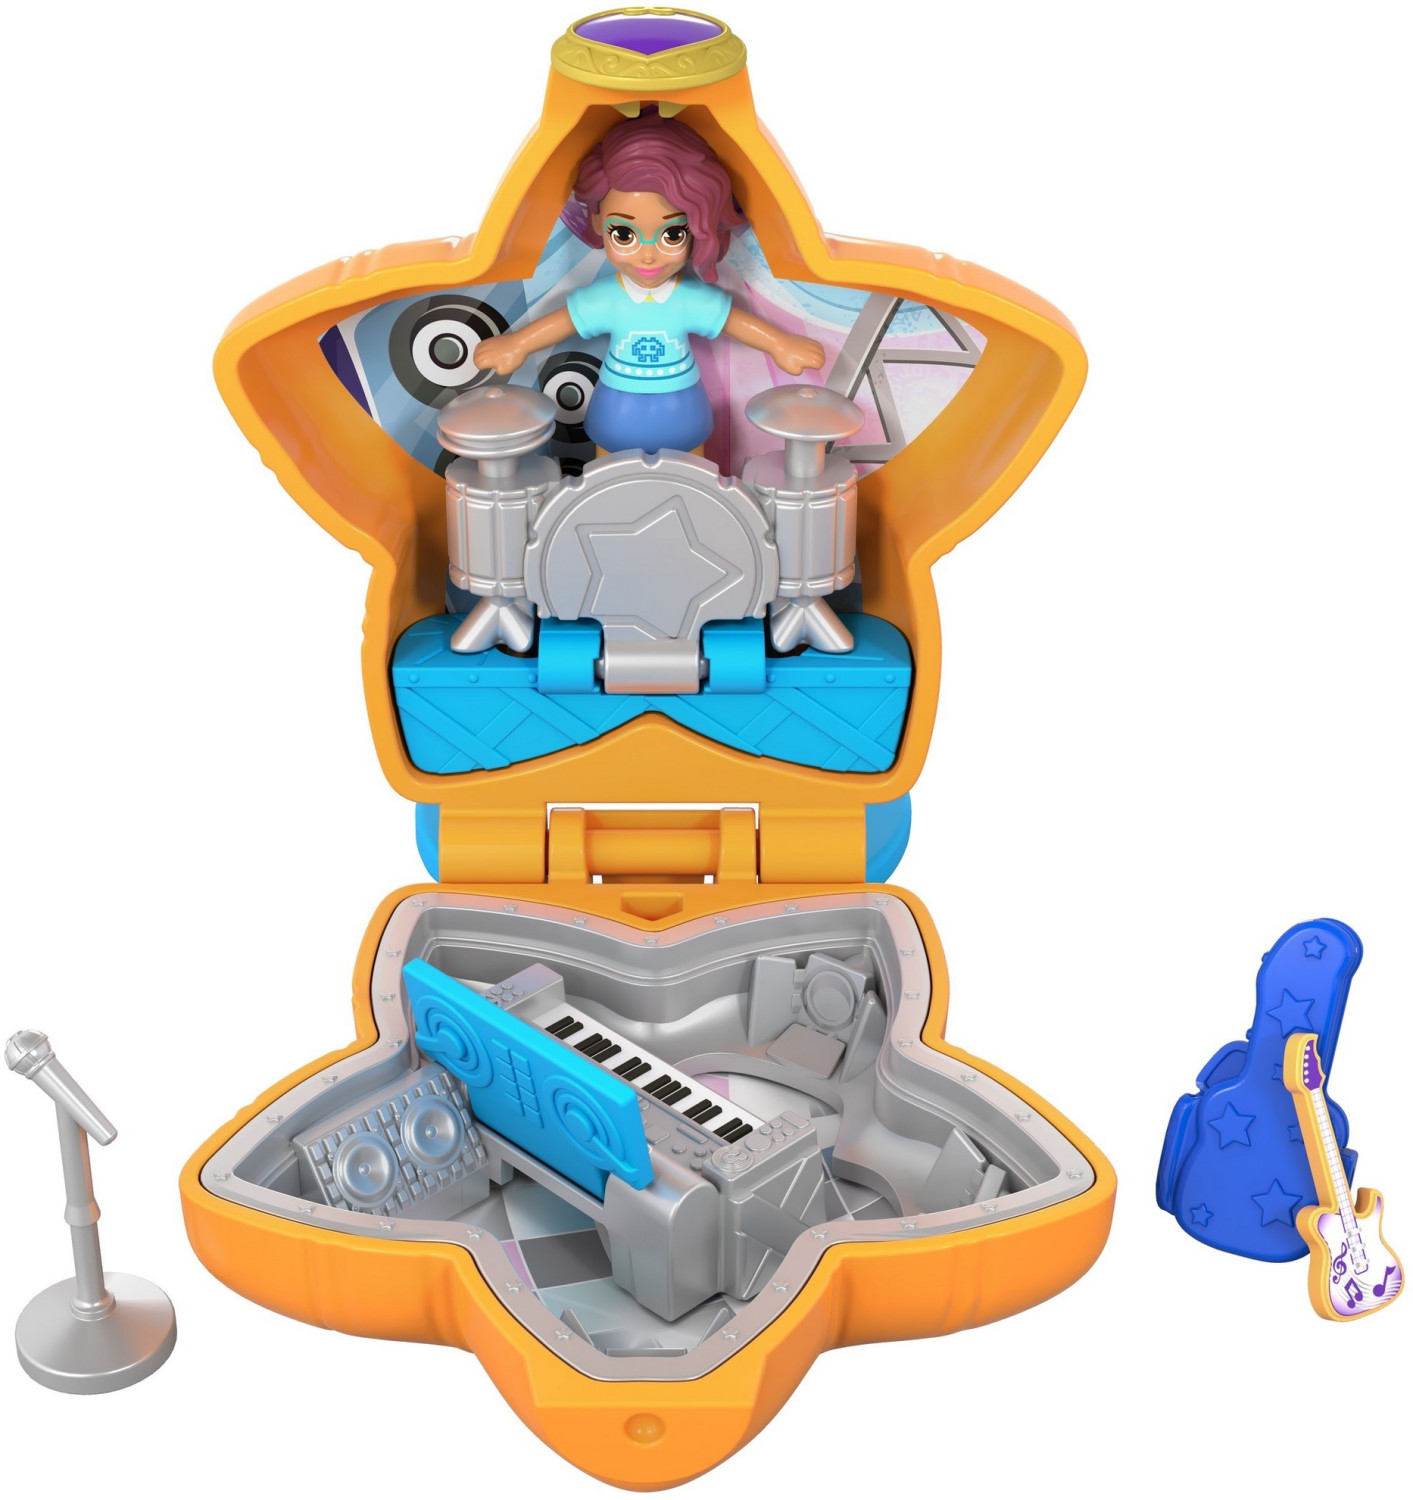 Photos - Action Figures / Transformers Polly Pocket Tiny Pocket Places Concert Playset 